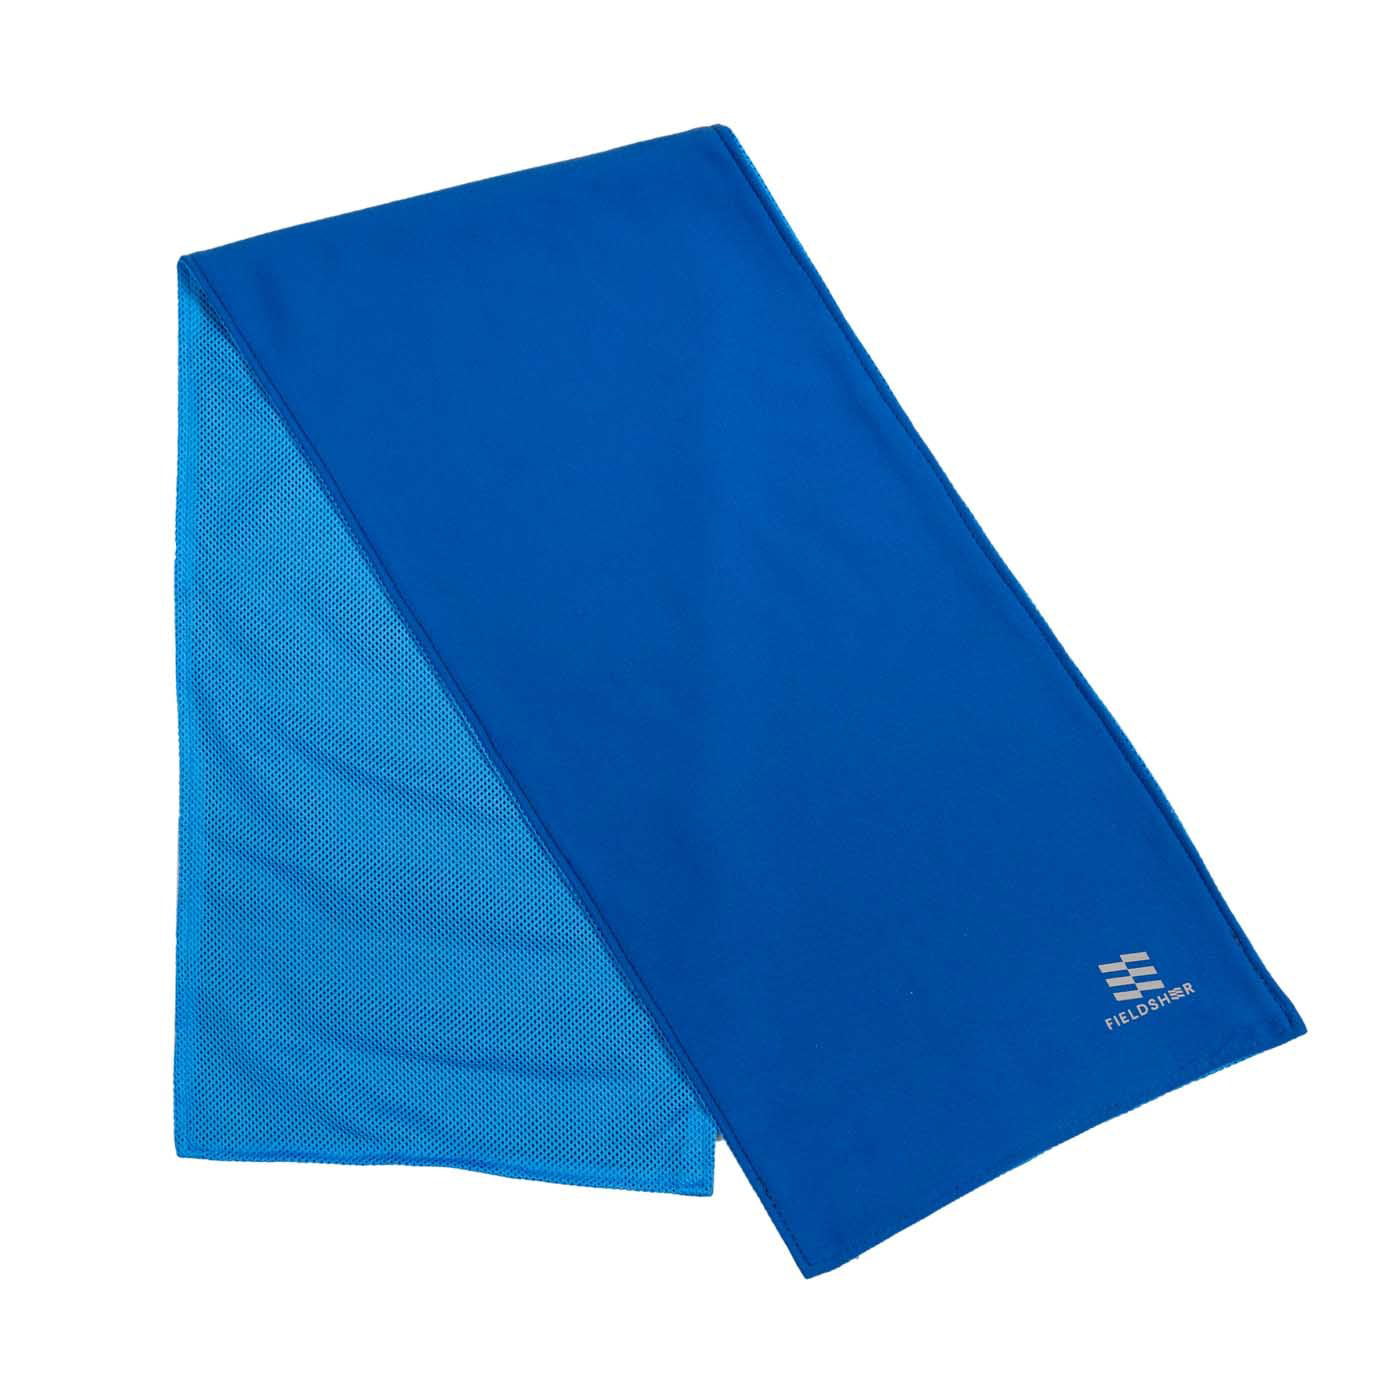 Details about   Mission Enduracool Cooling face cover& Towel 2in 1-Royal Blue- Space Dye-3pcs 